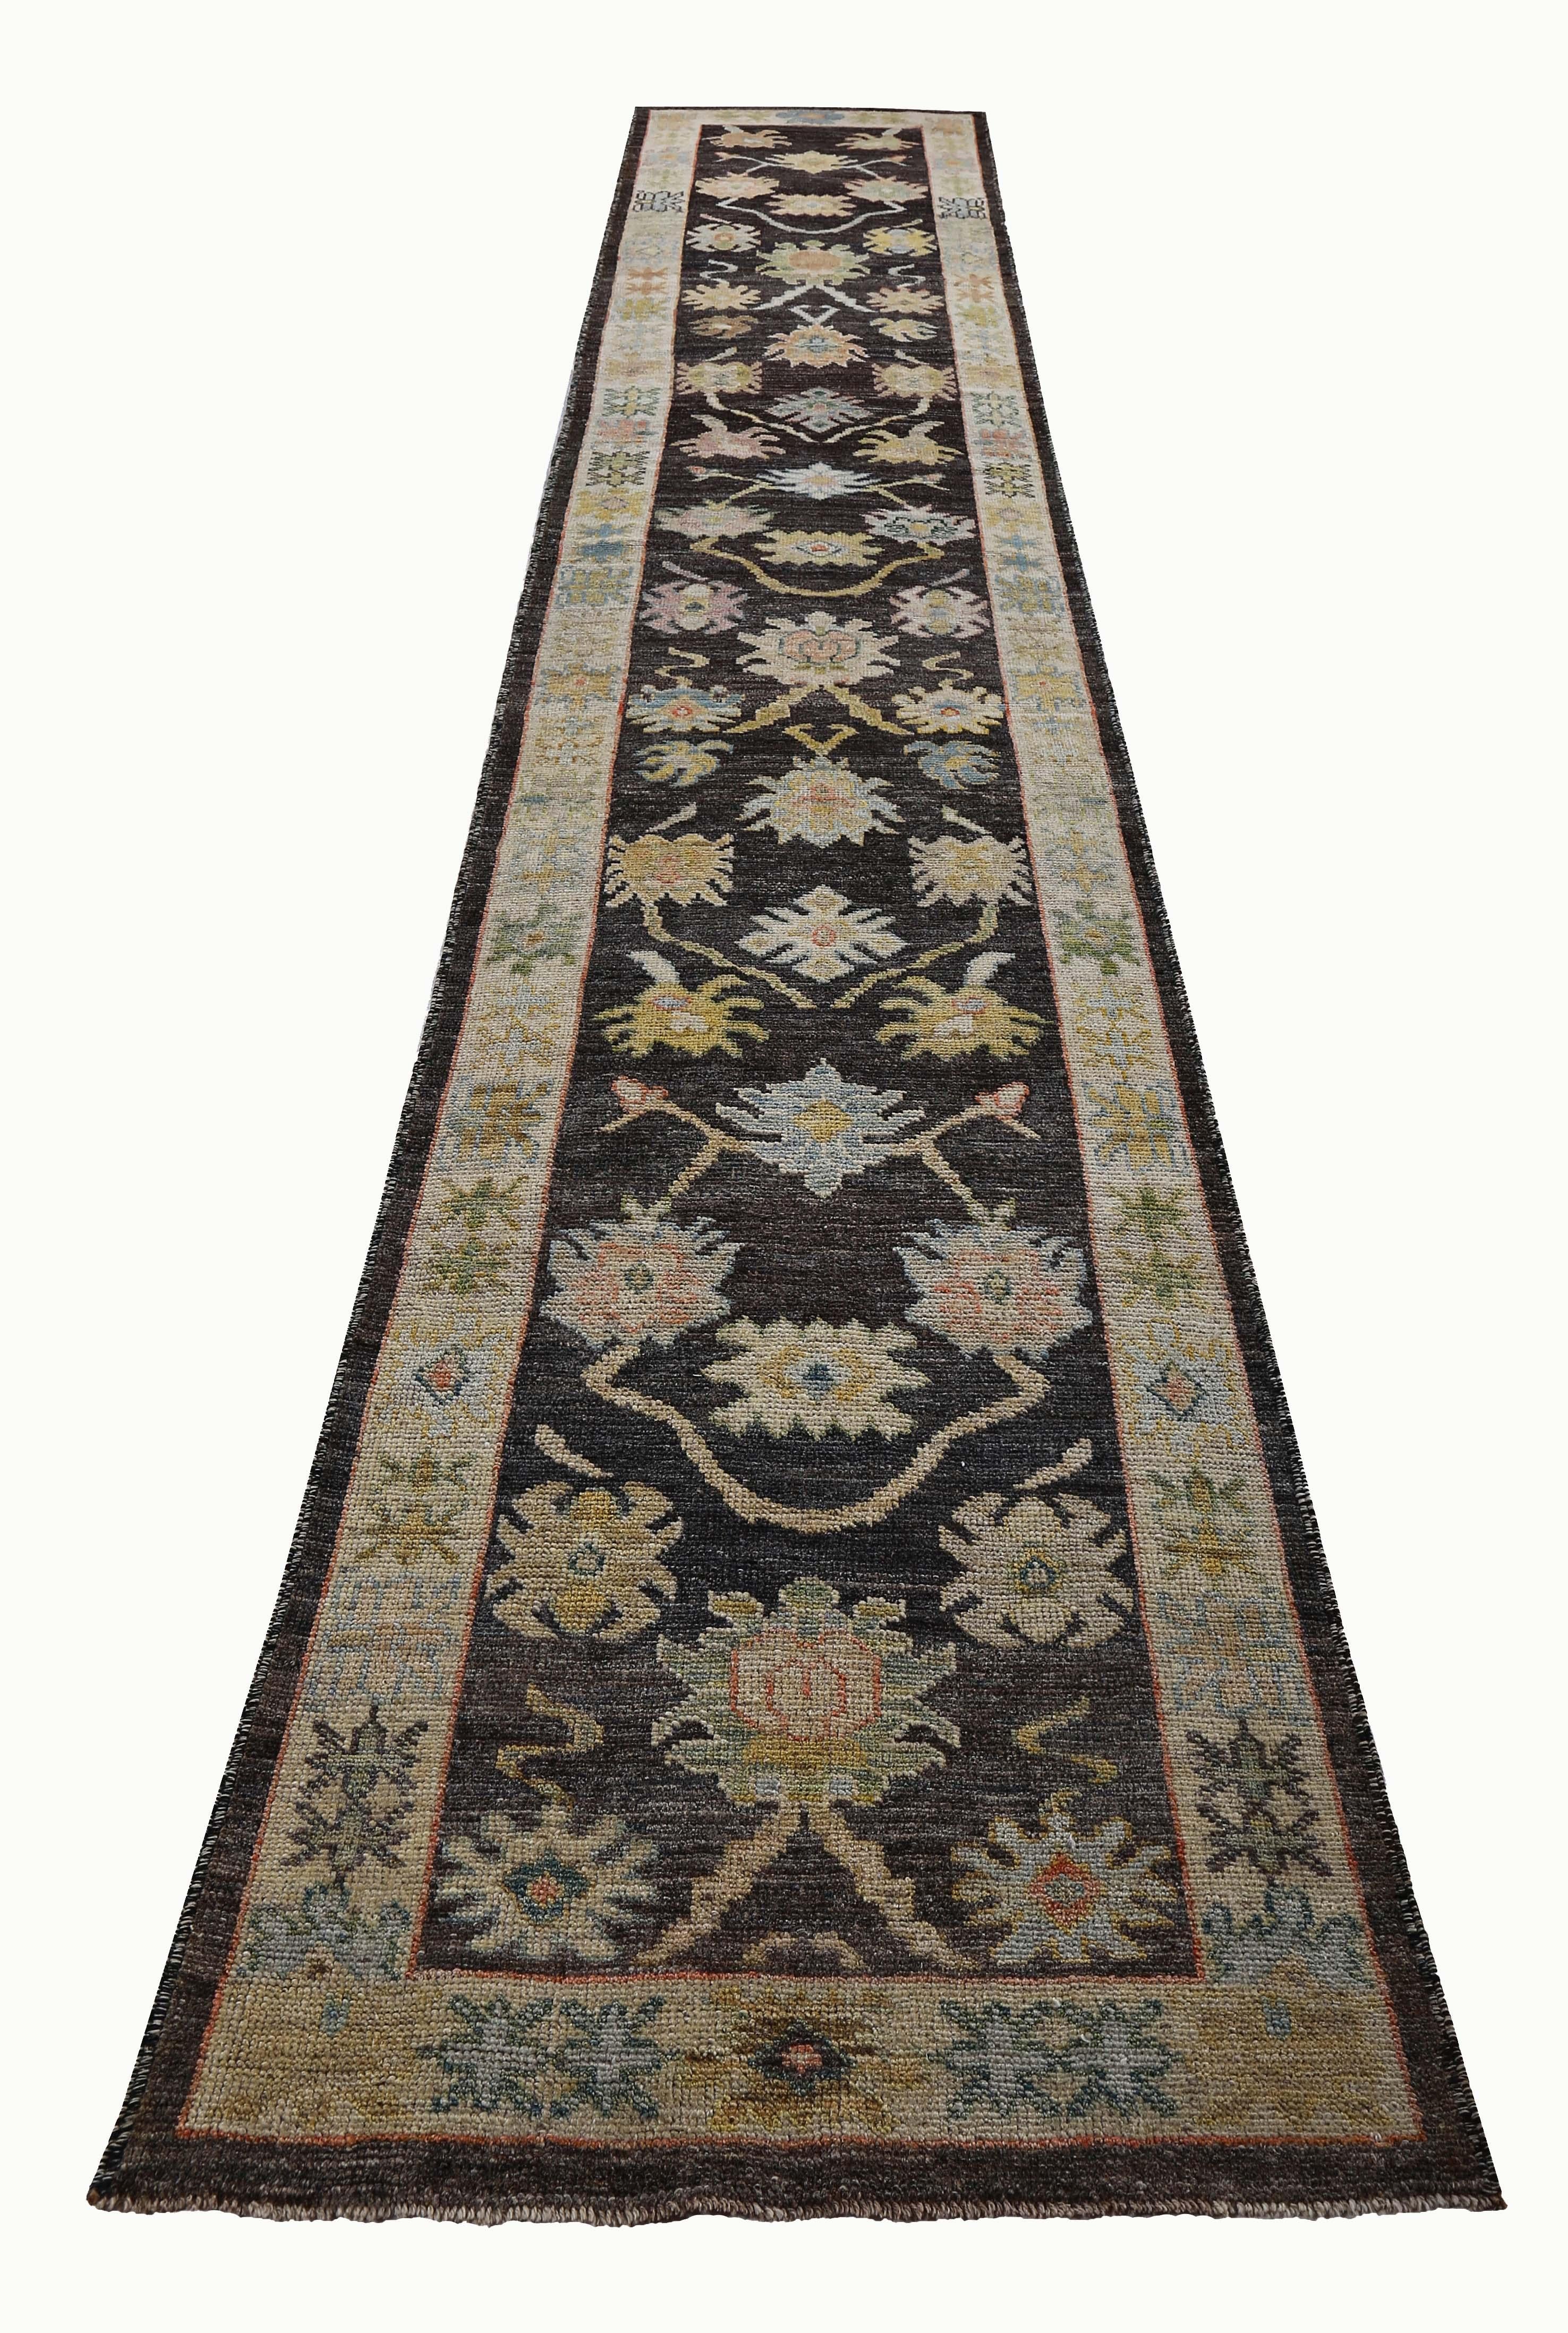 Turkish runner rug made of handwoven sheep’s wool of the finest quality. It’s colored with organic vegetable dyes that are certified safe for humans and pets alike. It features colorful flower heads on a mixed brown and ivory field. Flower patterns